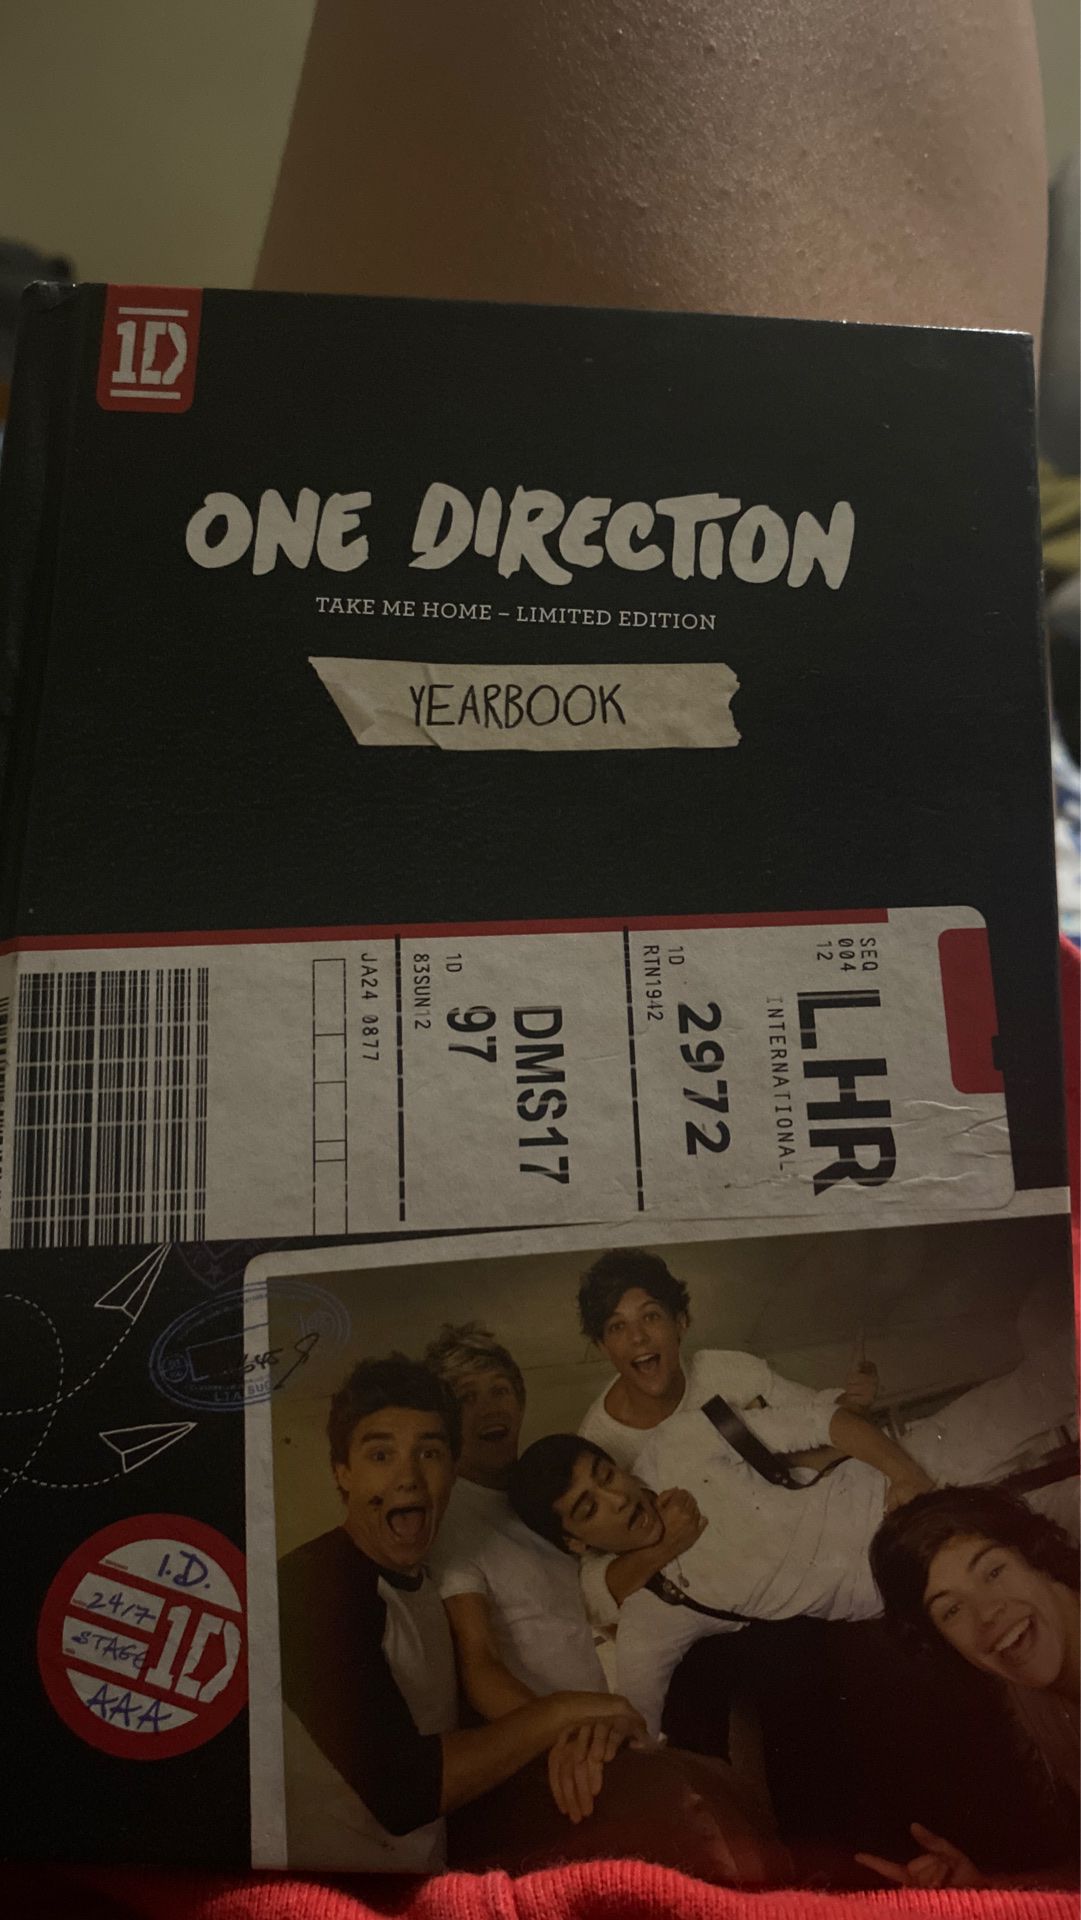 One direction limited edition take me home yearbook plus cd